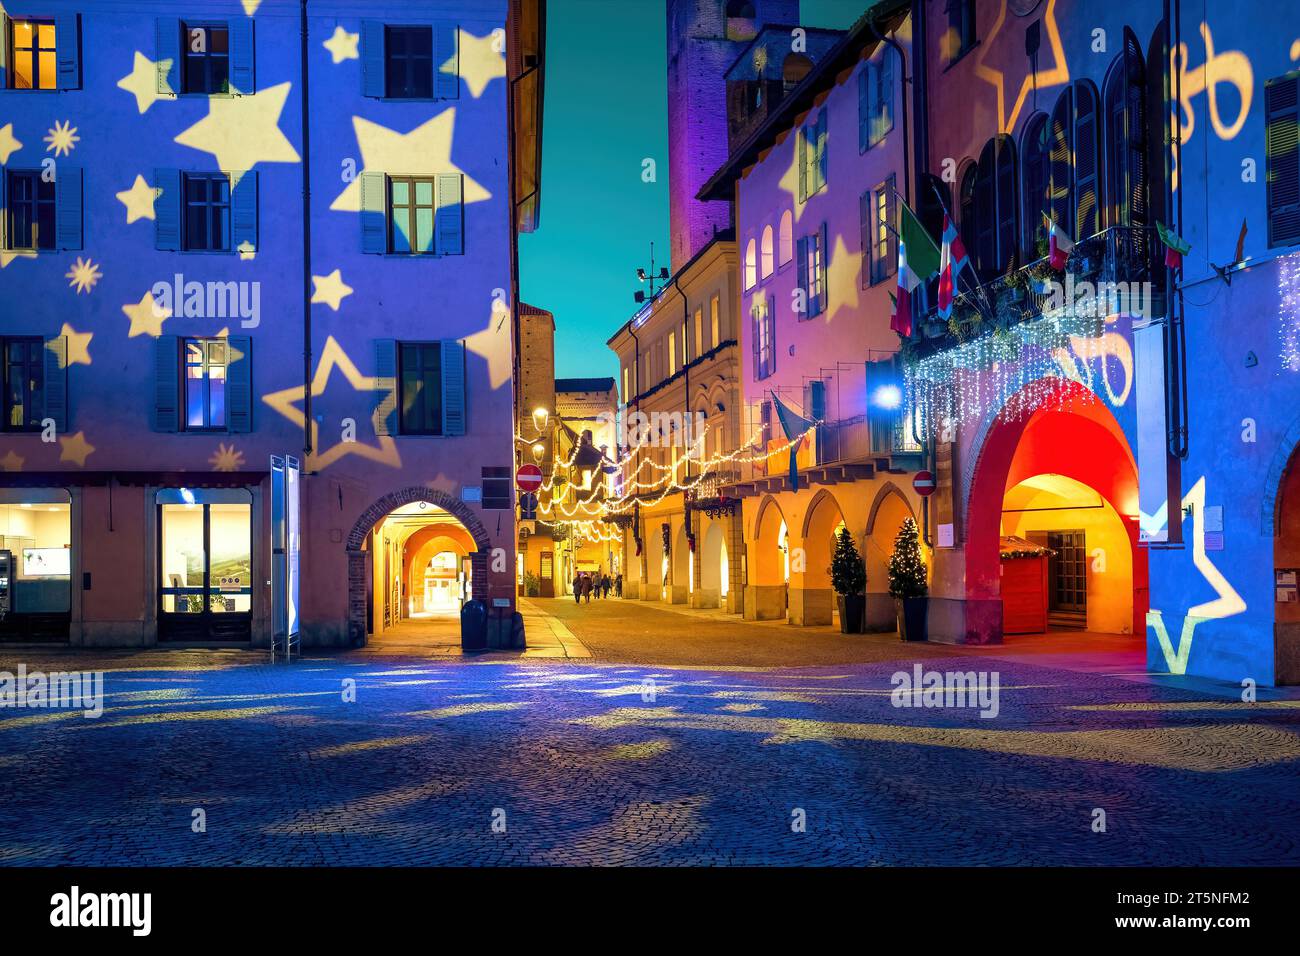 Town square, cobblestone street and old historic buildings illuminated and decorated for Christmas holidays in historic town of Alba, Piedmont, Italy. Stock Photo